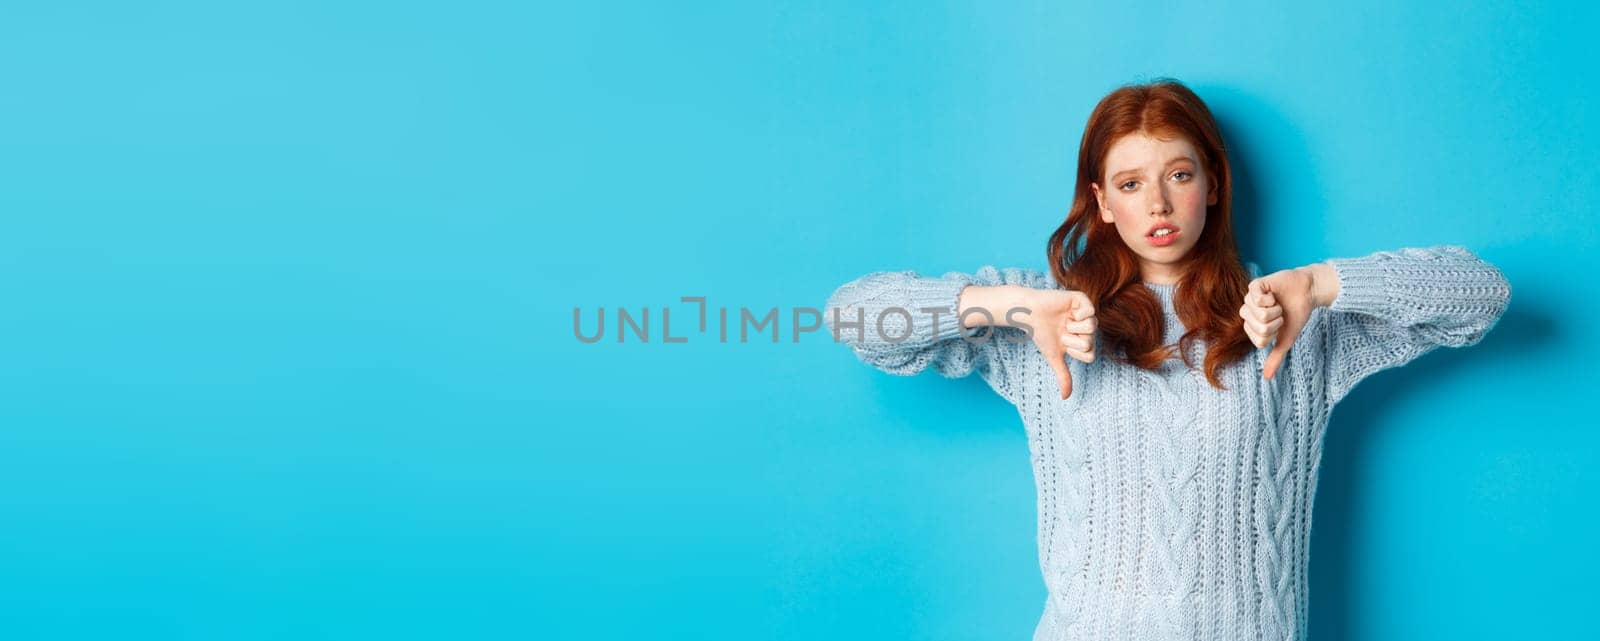 Bored and skeptical redhead girl showing thumbs down, looking unamused and uninterested, standing over blue background.